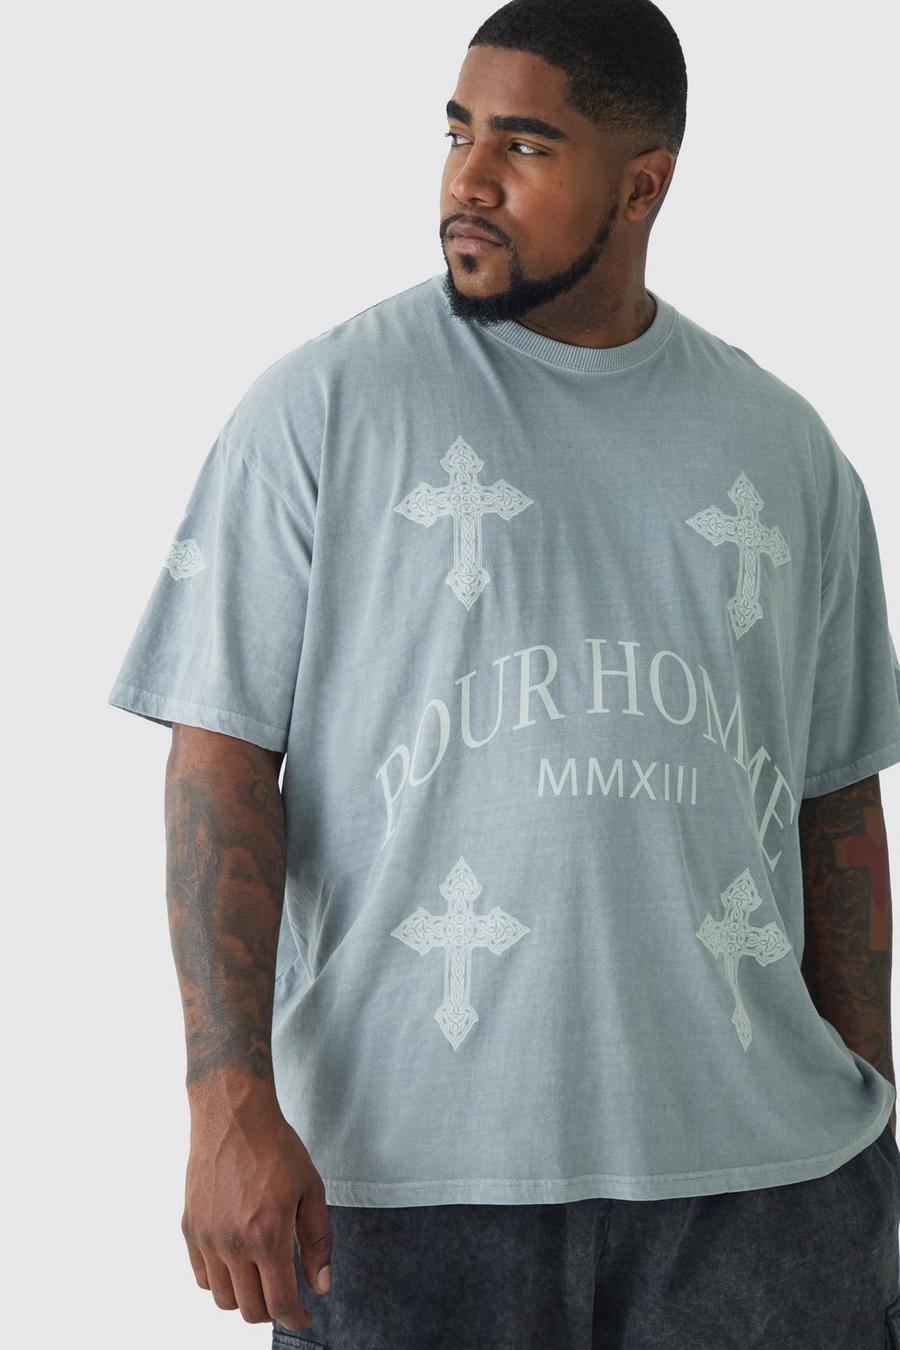 Plus Pour Homme Cross Printed T-shirt In Grey